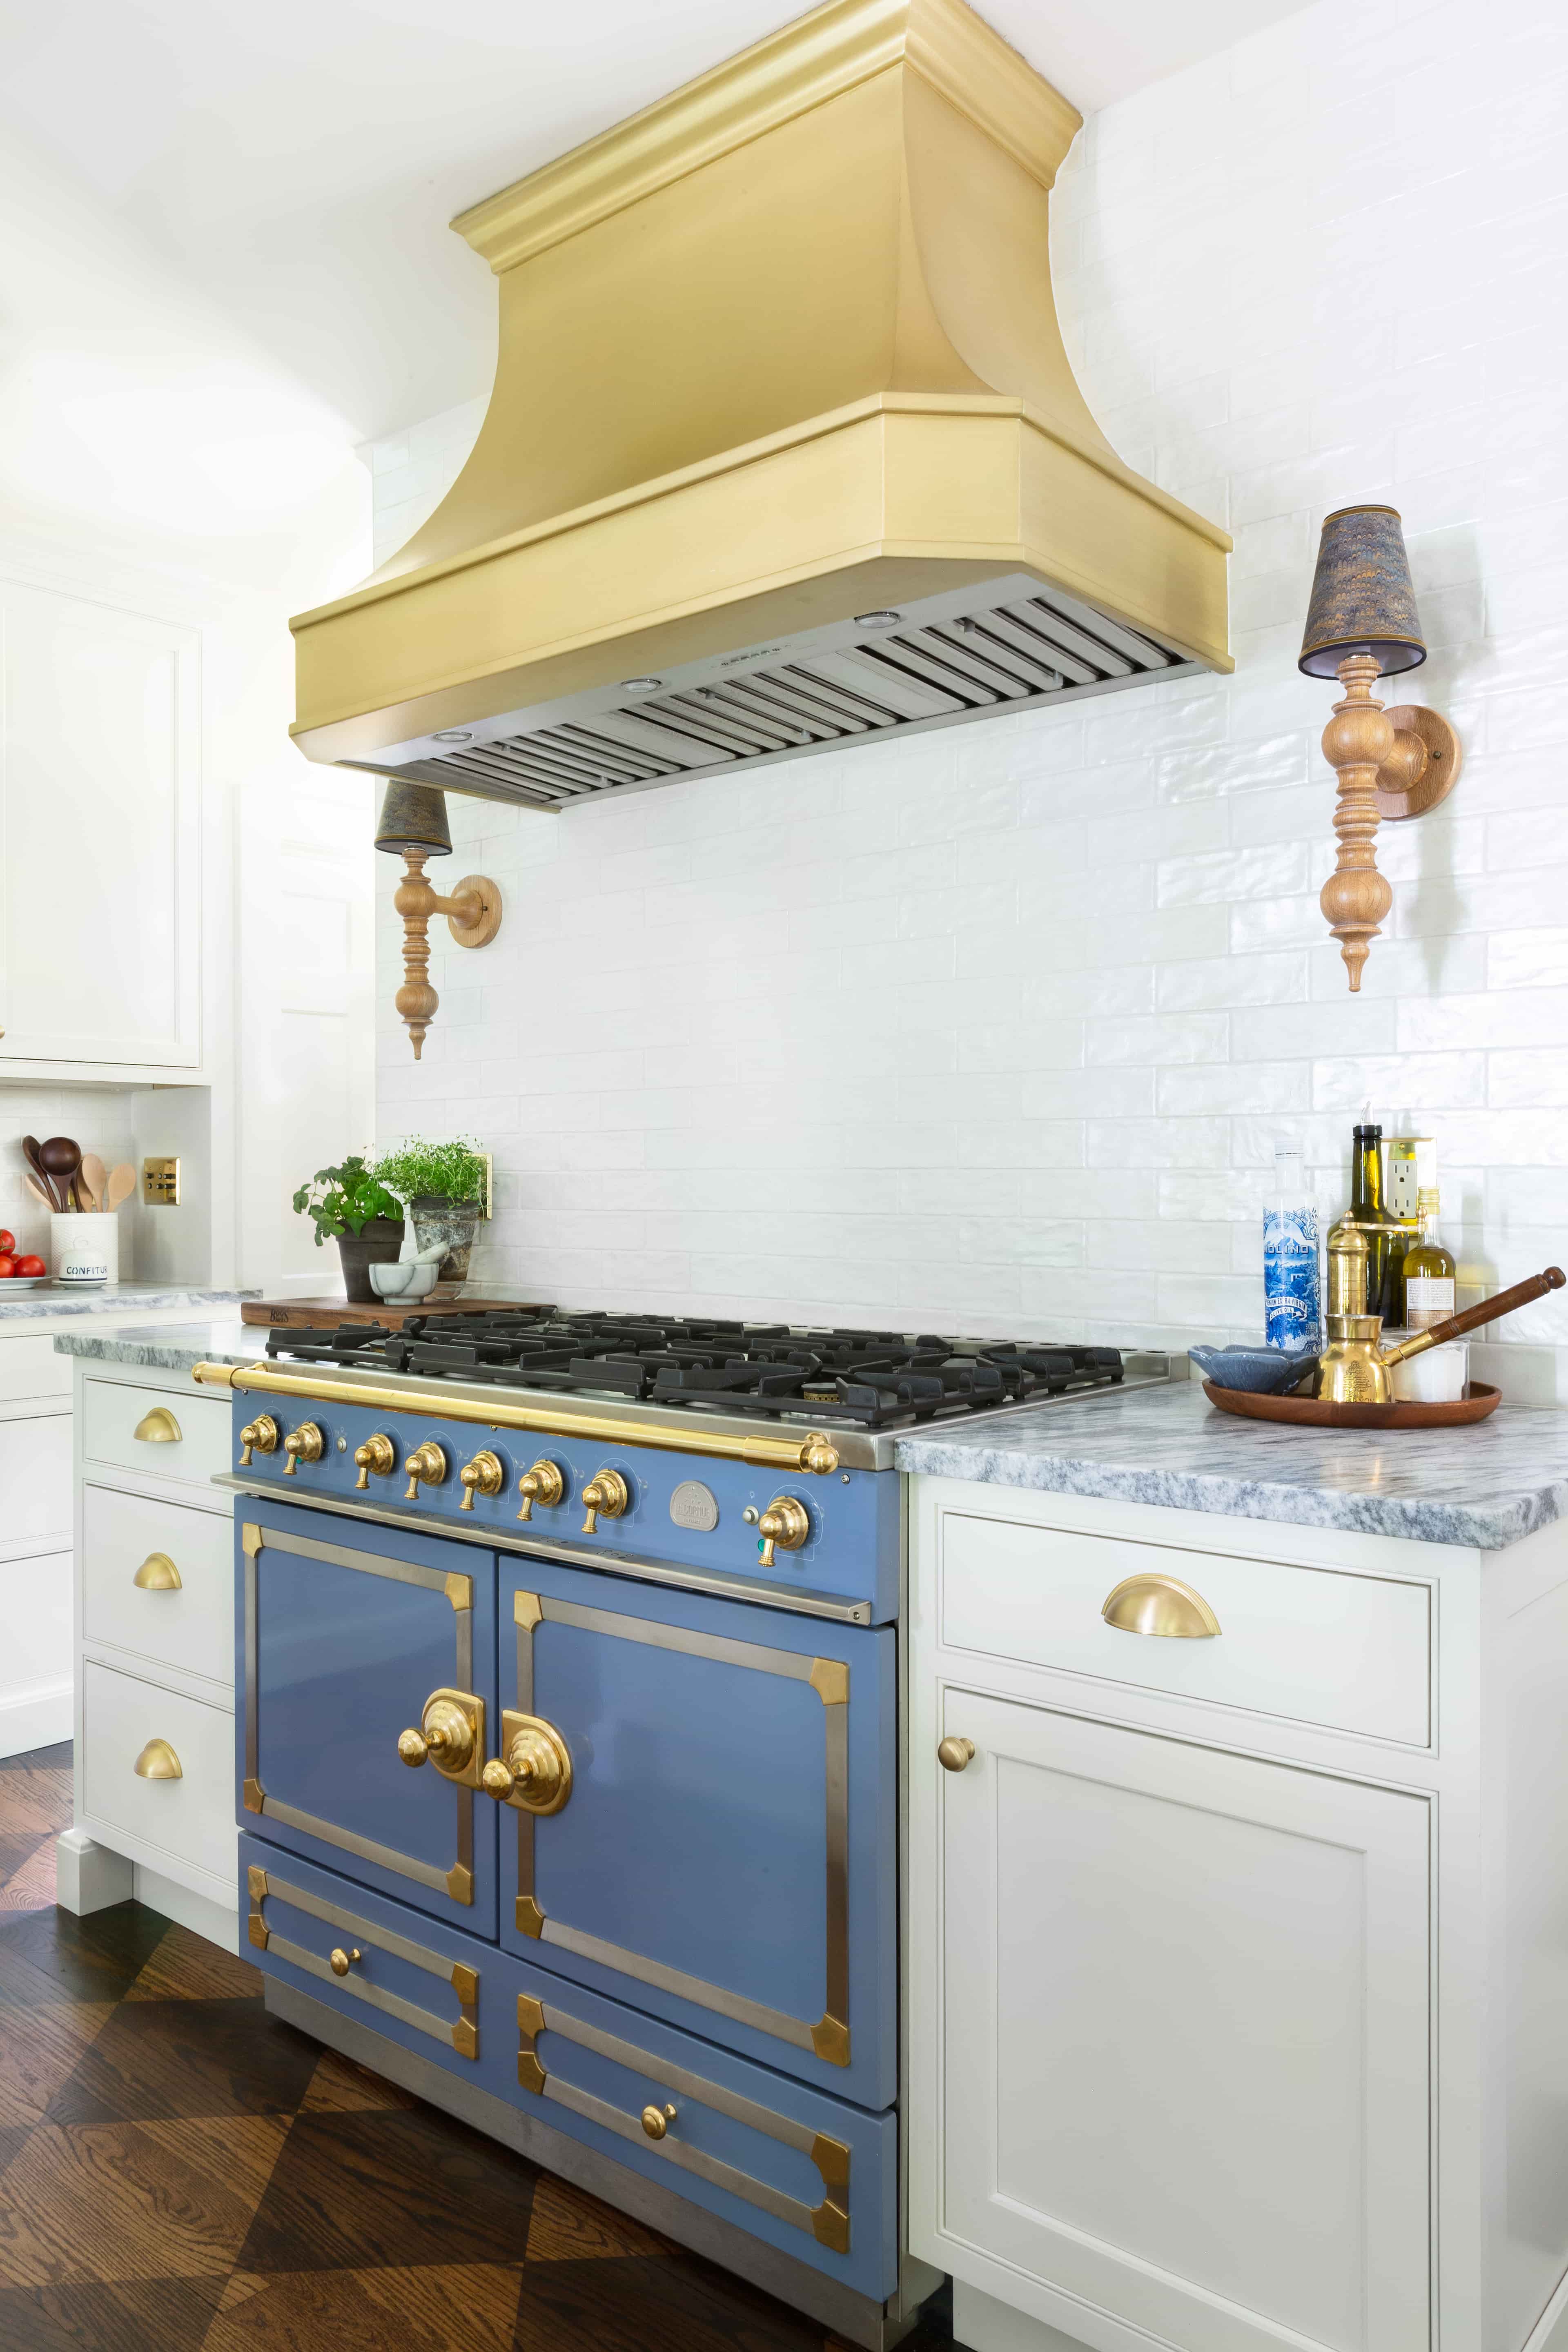 CopperSmith Classic CX4 Wall Mount Range Hood in a french style kitchen with Marble countertops white cabinets and white tile backsplash